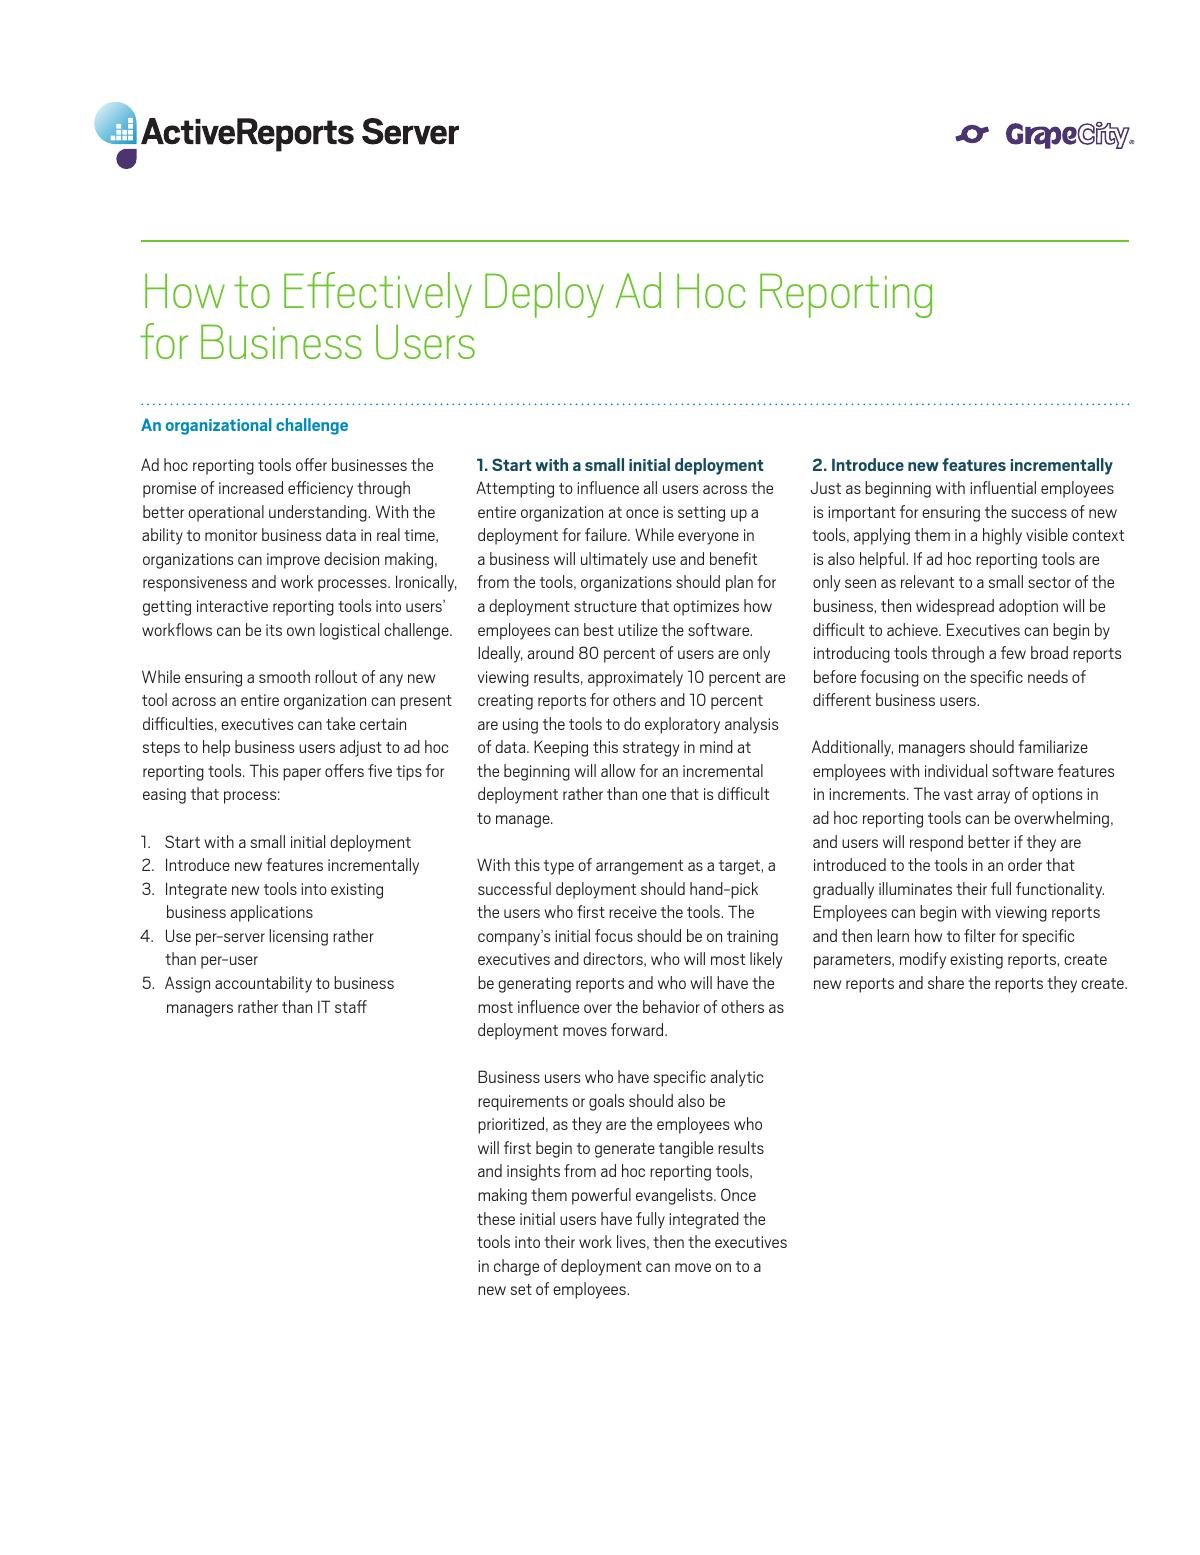 How to Effectively Deploy Ad Hoc Reporting for Business Users